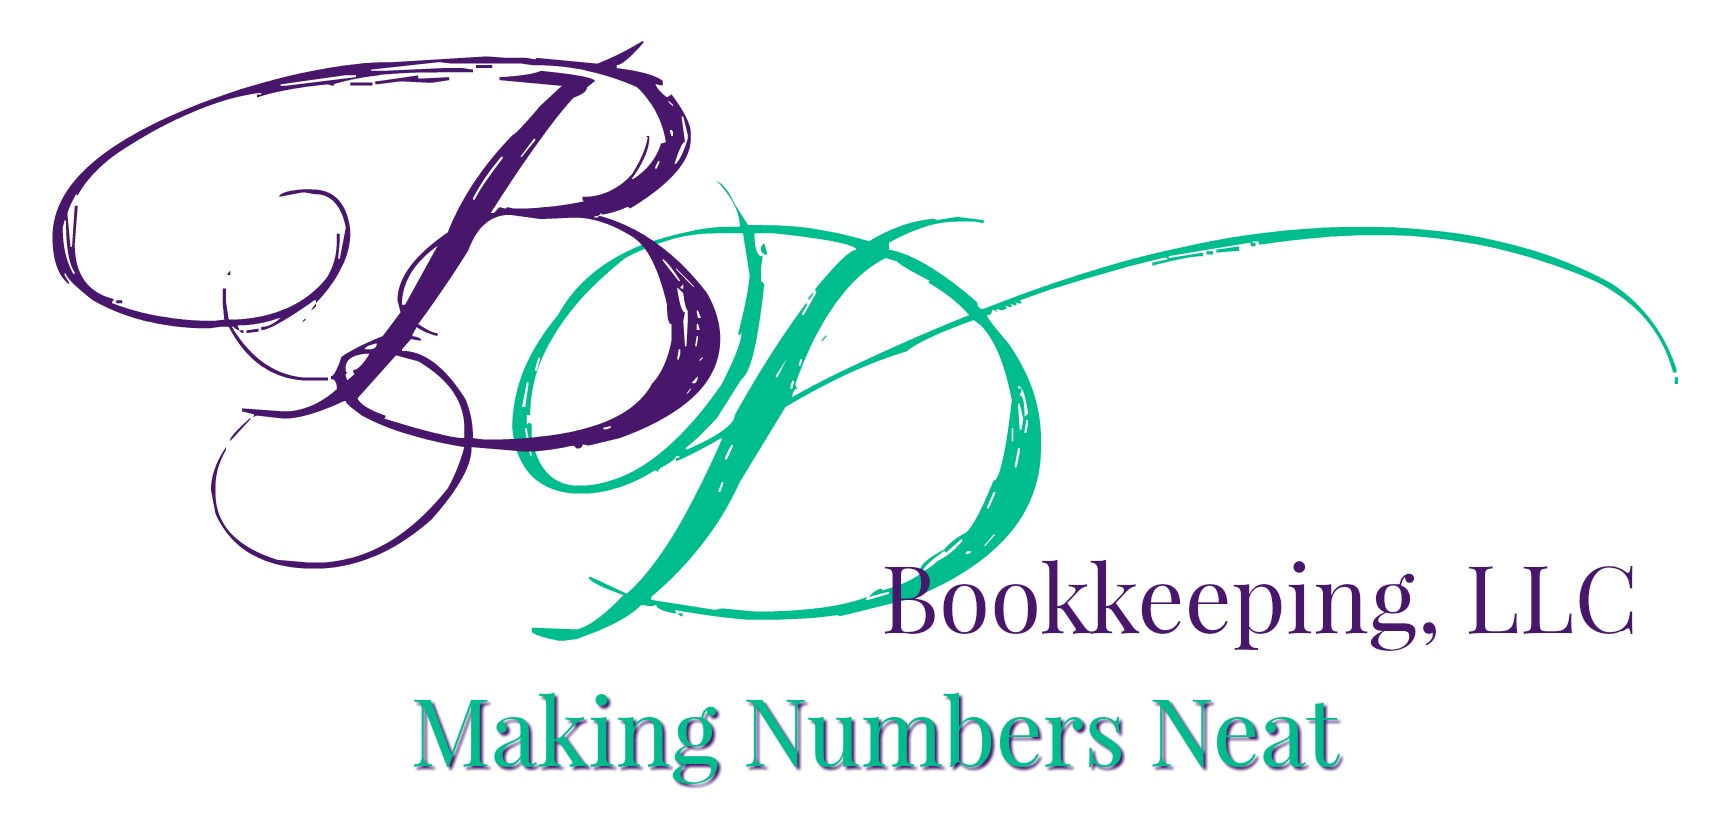 B D Bookkeeping Services